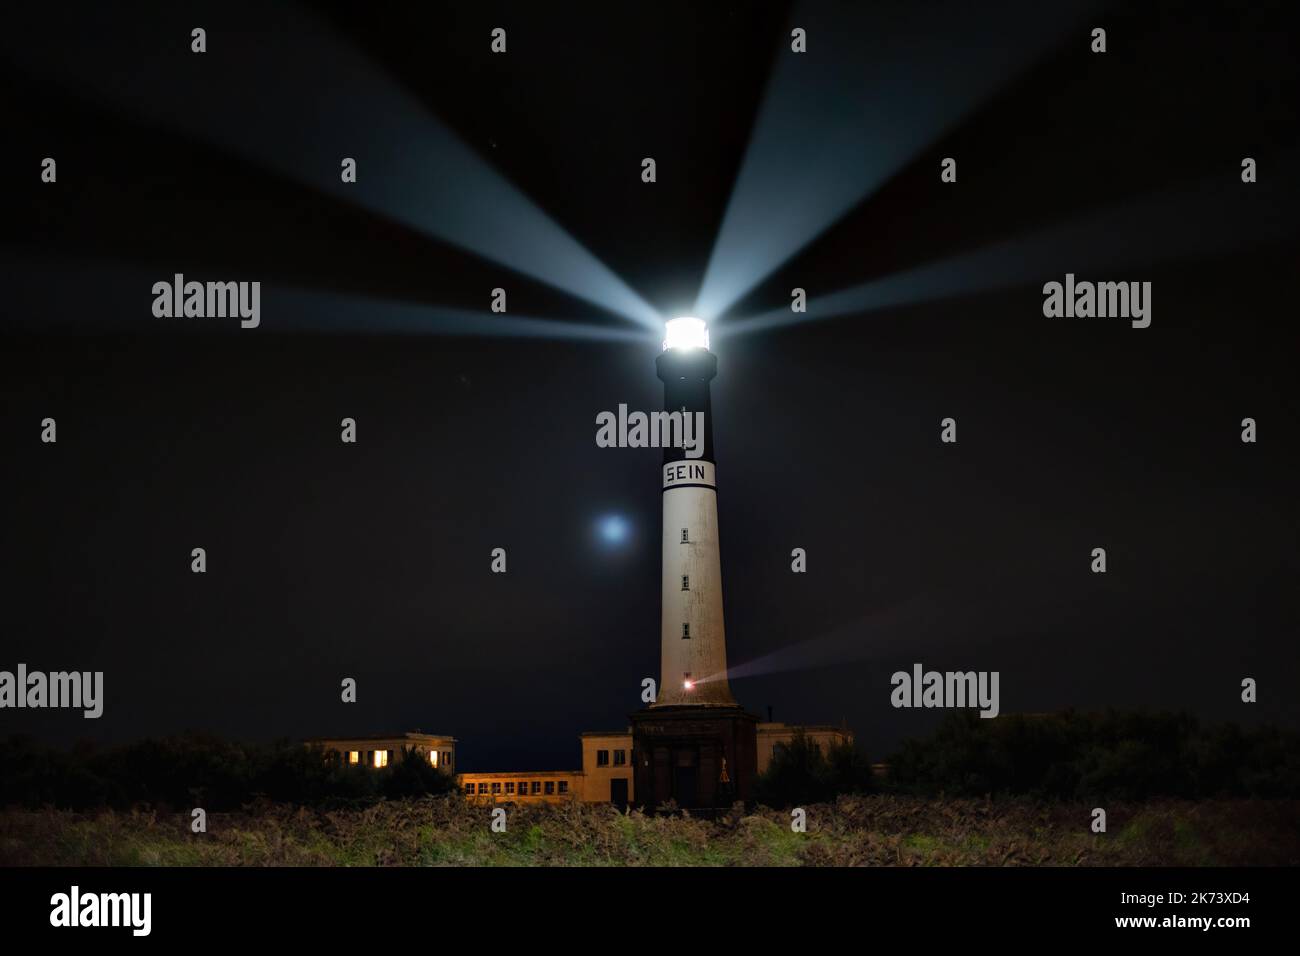 The tall and powerful Sein island lighthouse at night Stock Photo